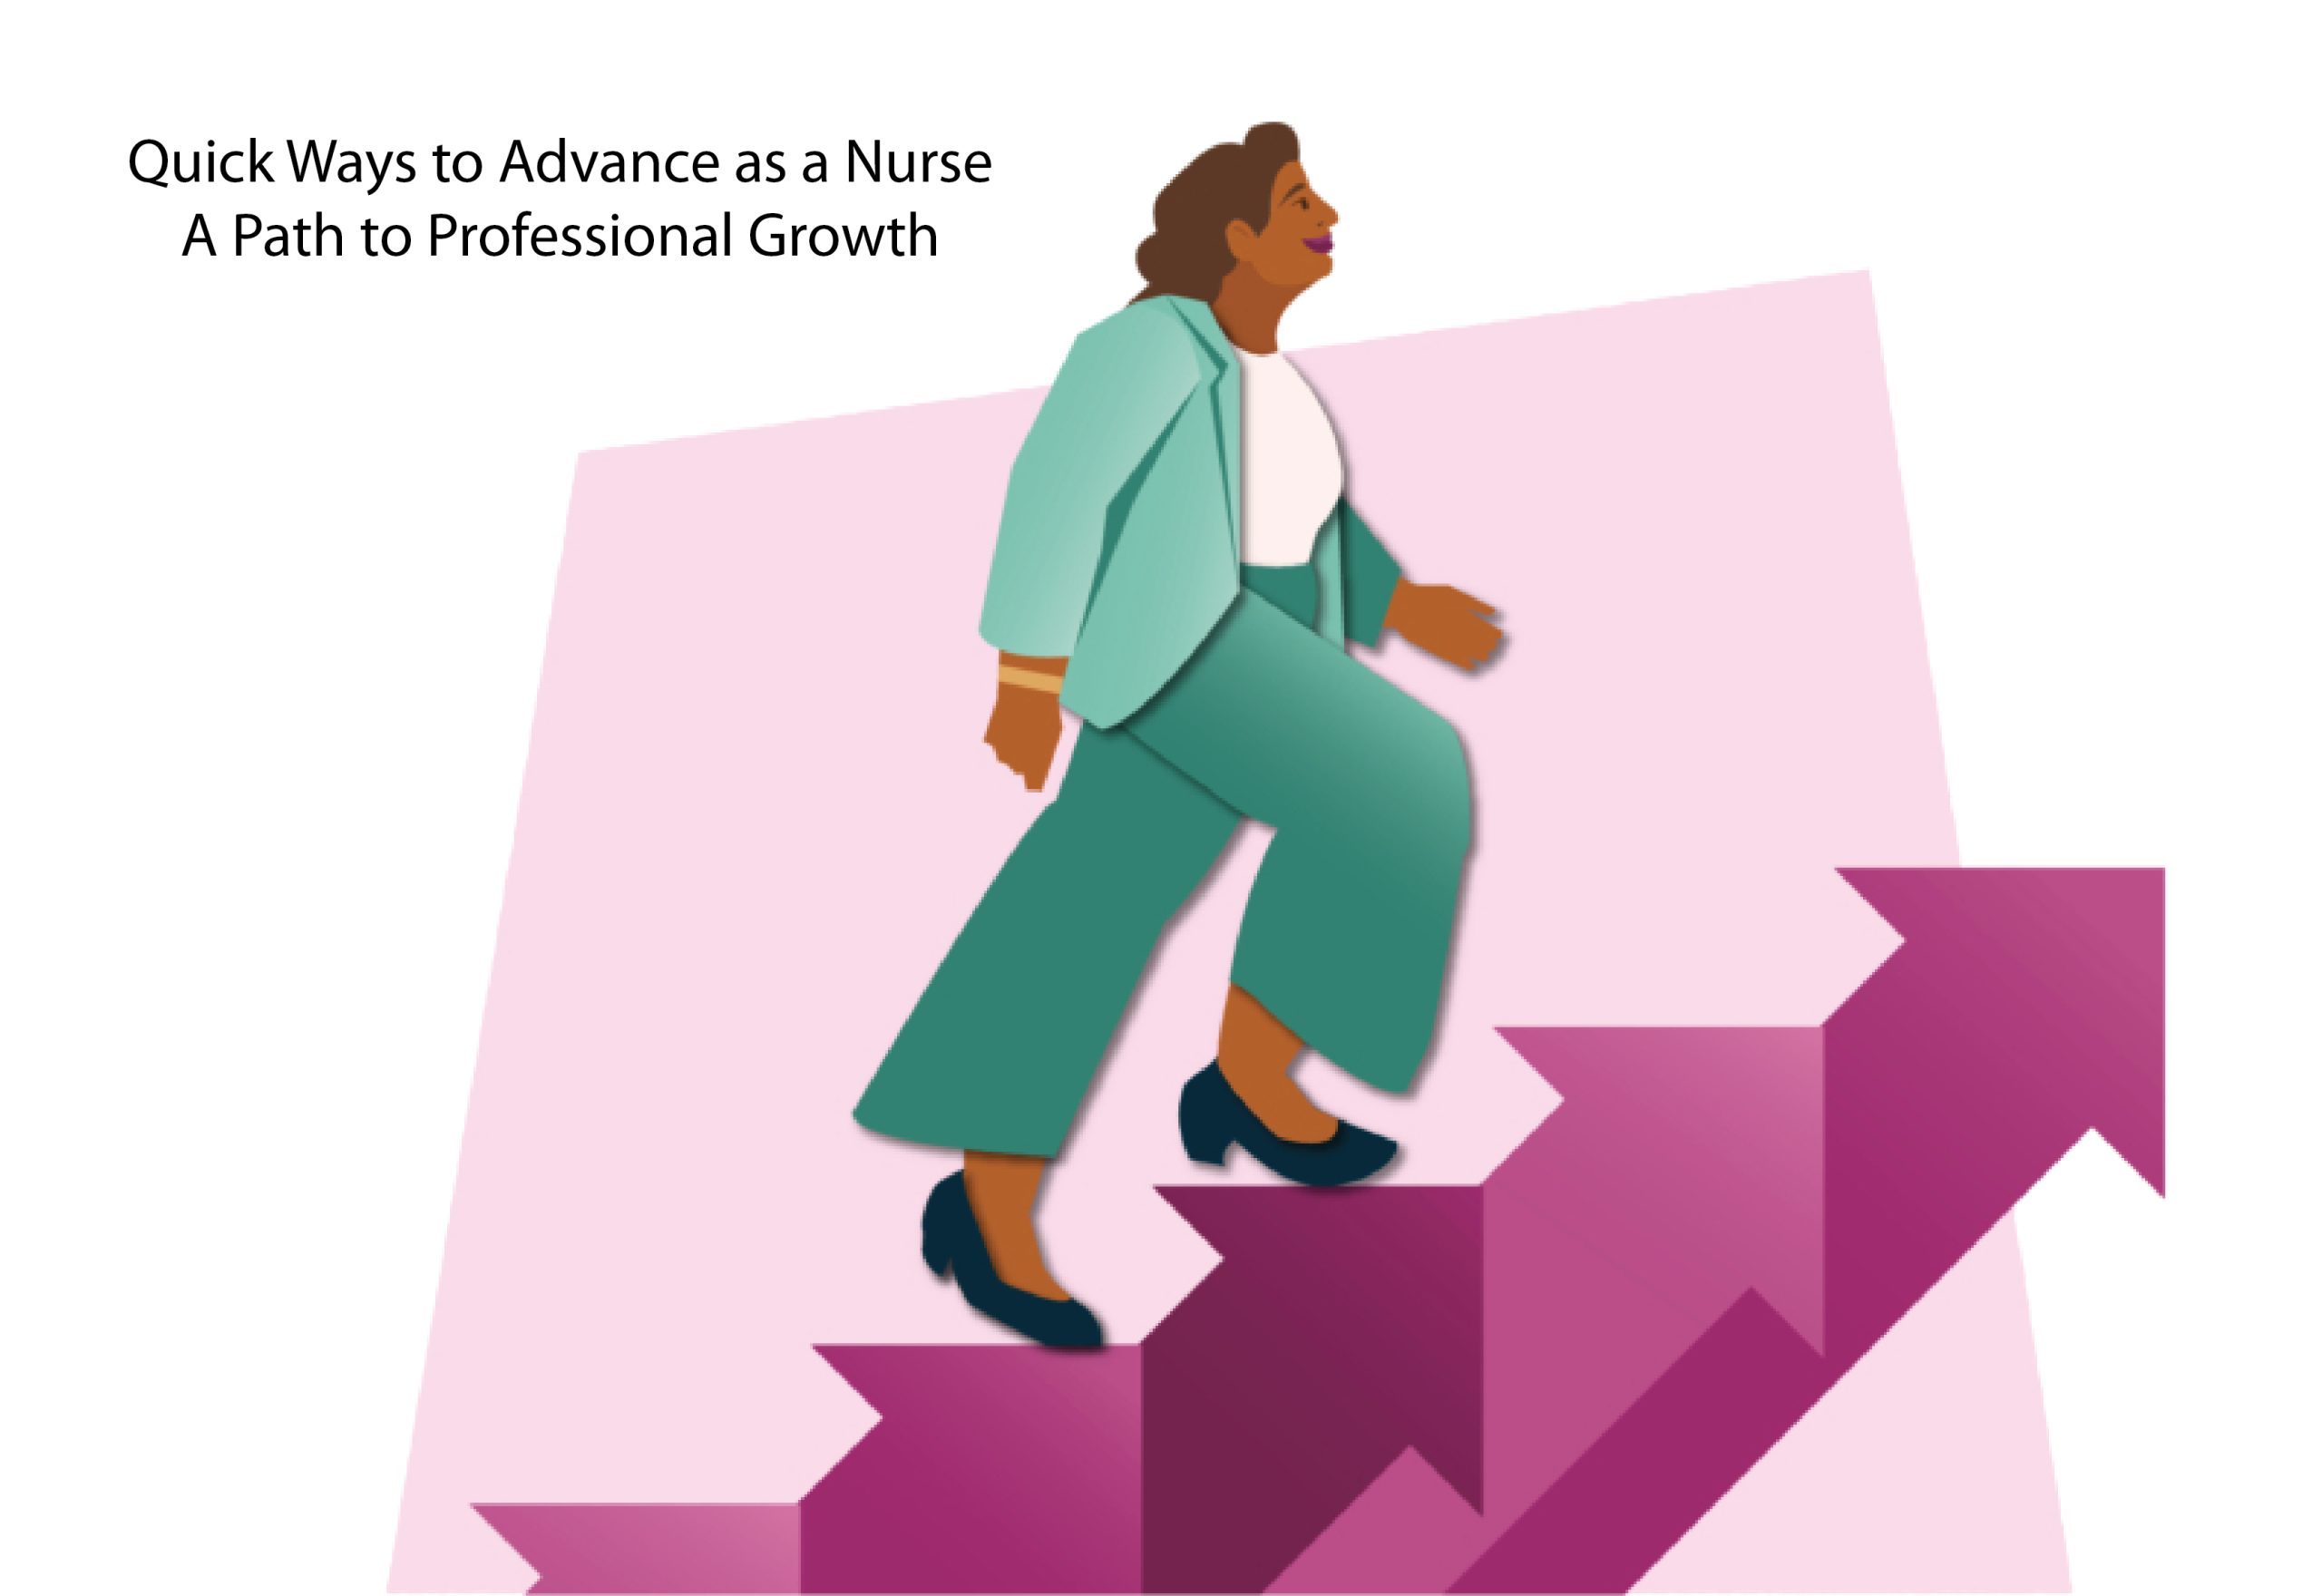 Quick Ways to Advance as a Nurse: A Path to Professional Growth